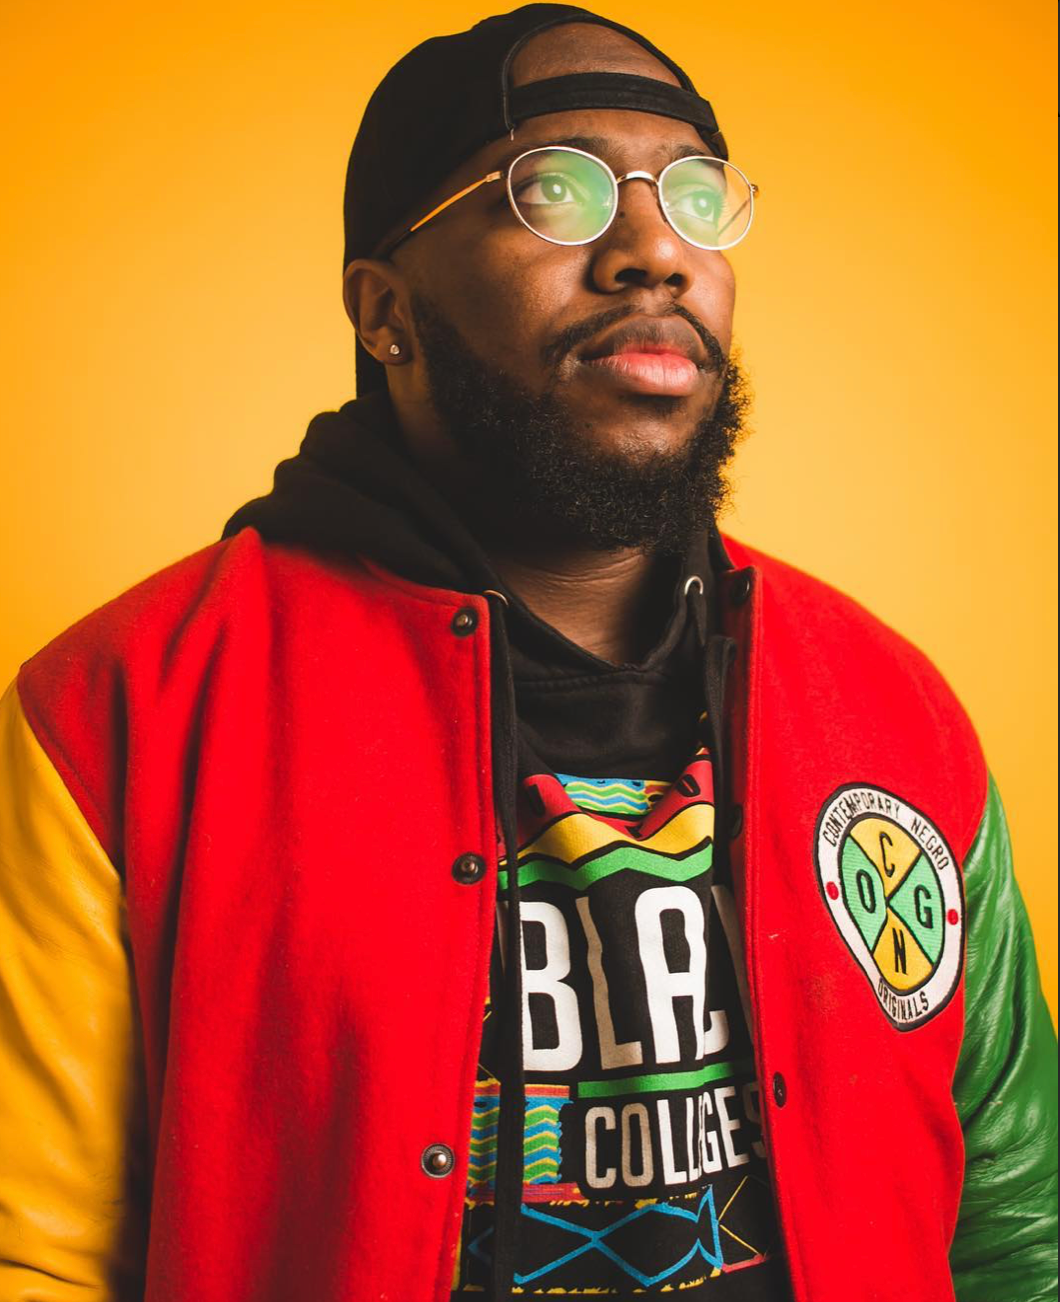 Support Black College Brand CEO, Corey Arvinger, on His Multi-Hyphenate Career, Partnering With AT&T Dream in Black and Advice for Young Creatives